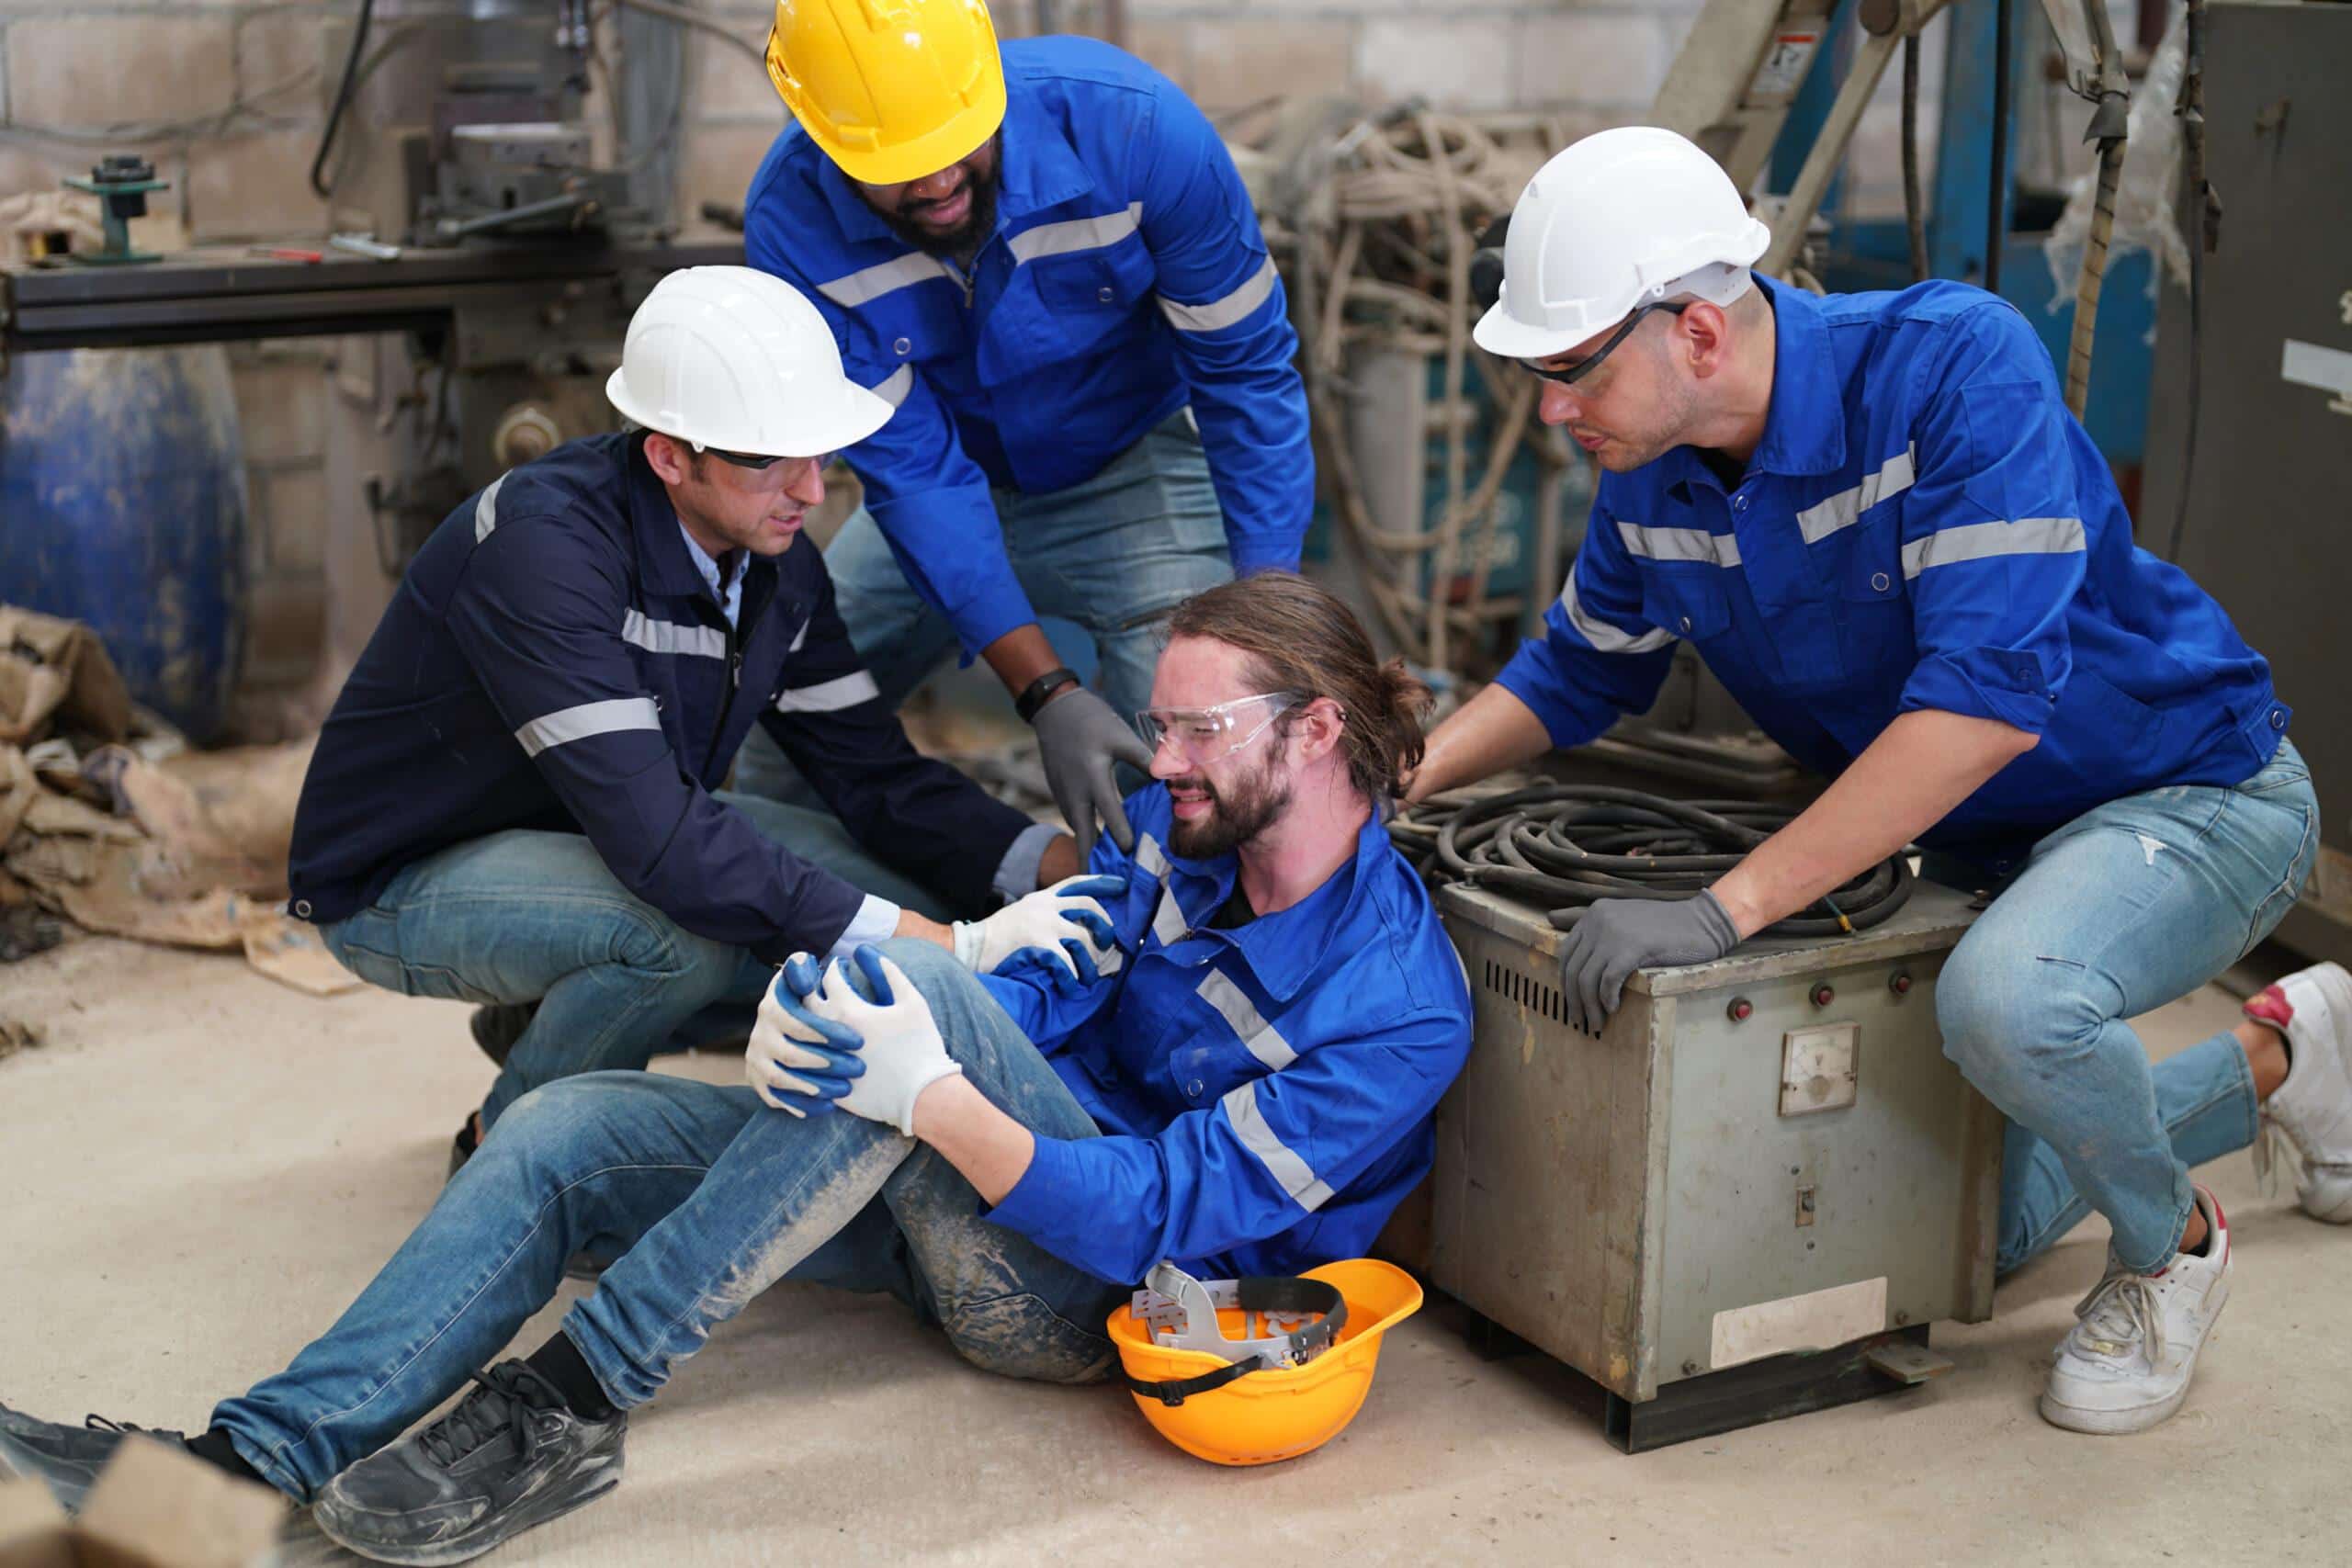 Worker receiving industrial injury in factory and colleague helping him while  injured on leg.